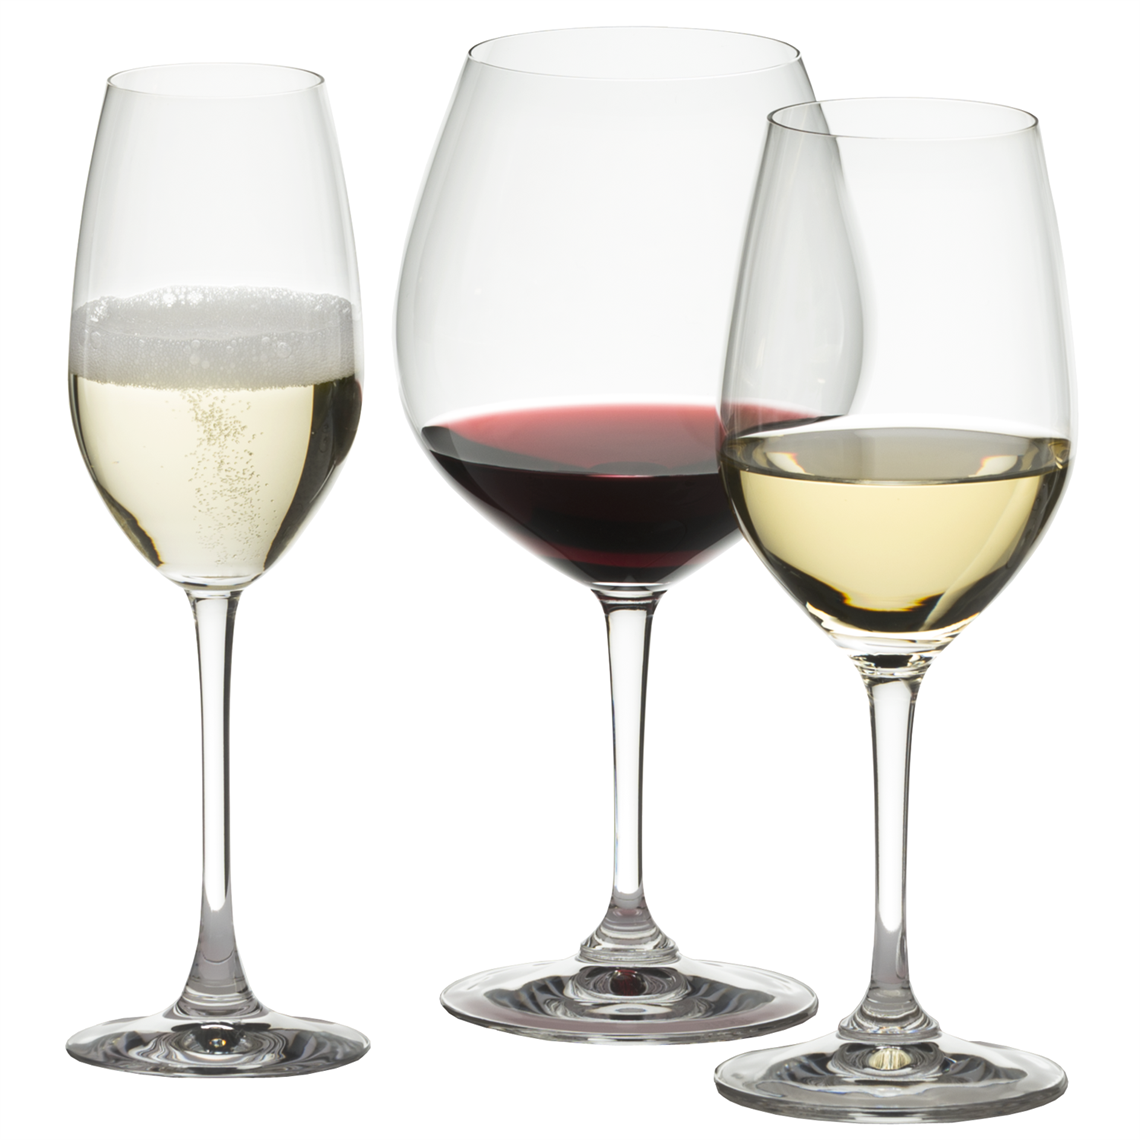 View more restaurant & trade glasses from our Restaurant & Trade Glasses range